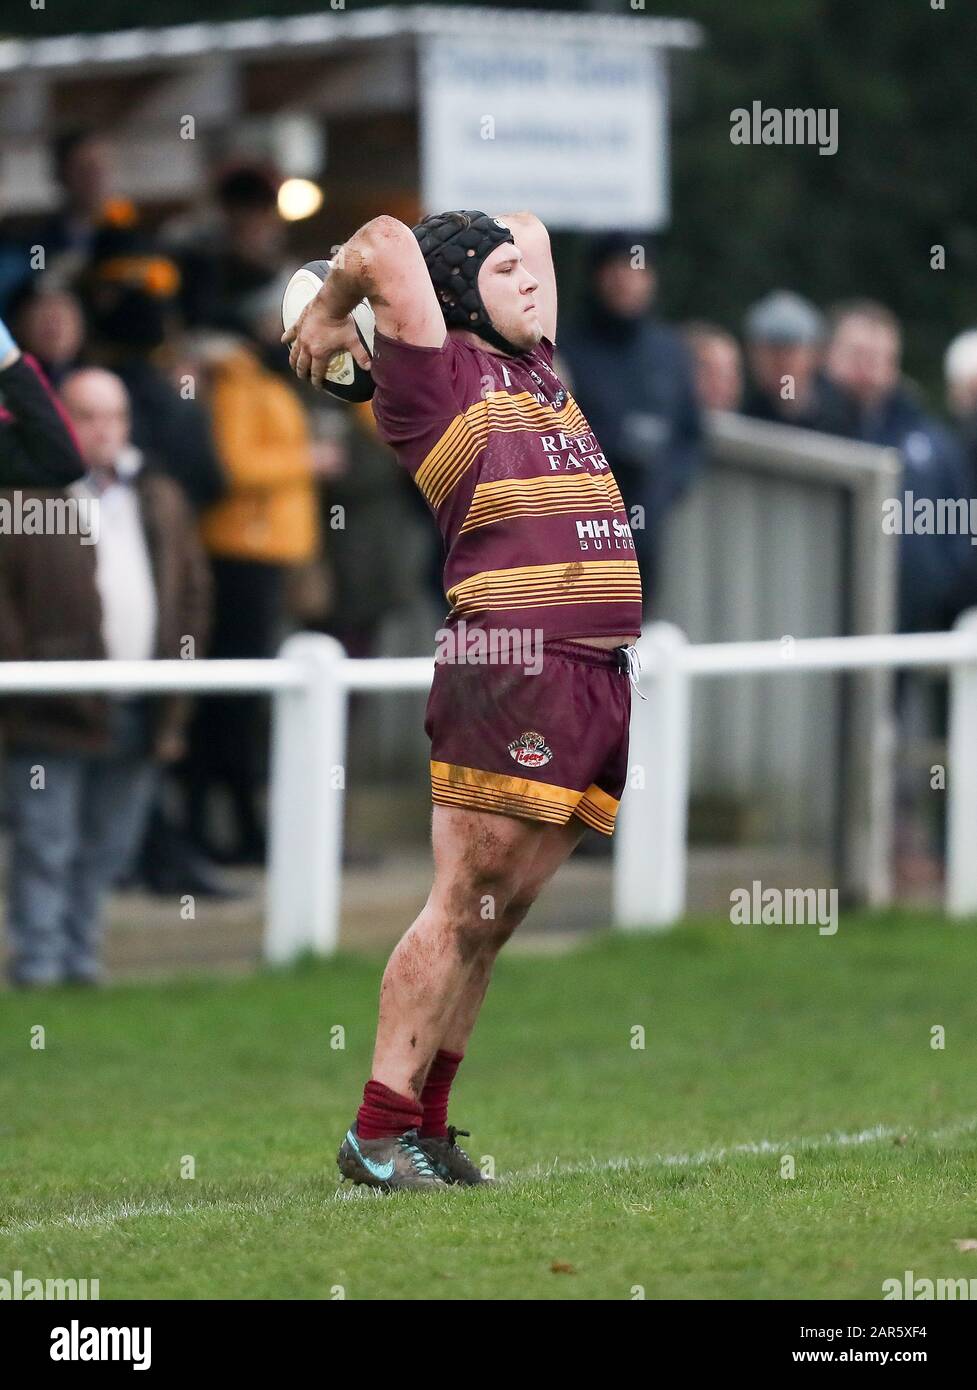 25.01.2020, Hinckley, Leicester, England. Rugby Union, Hinckley rfc v Sedgley Park rfc.   Thomas Coe in action for Sedgley Park during the RFU National League 2 North (NL2N) game played at the Leicester  Road Stadium. Stock Photo